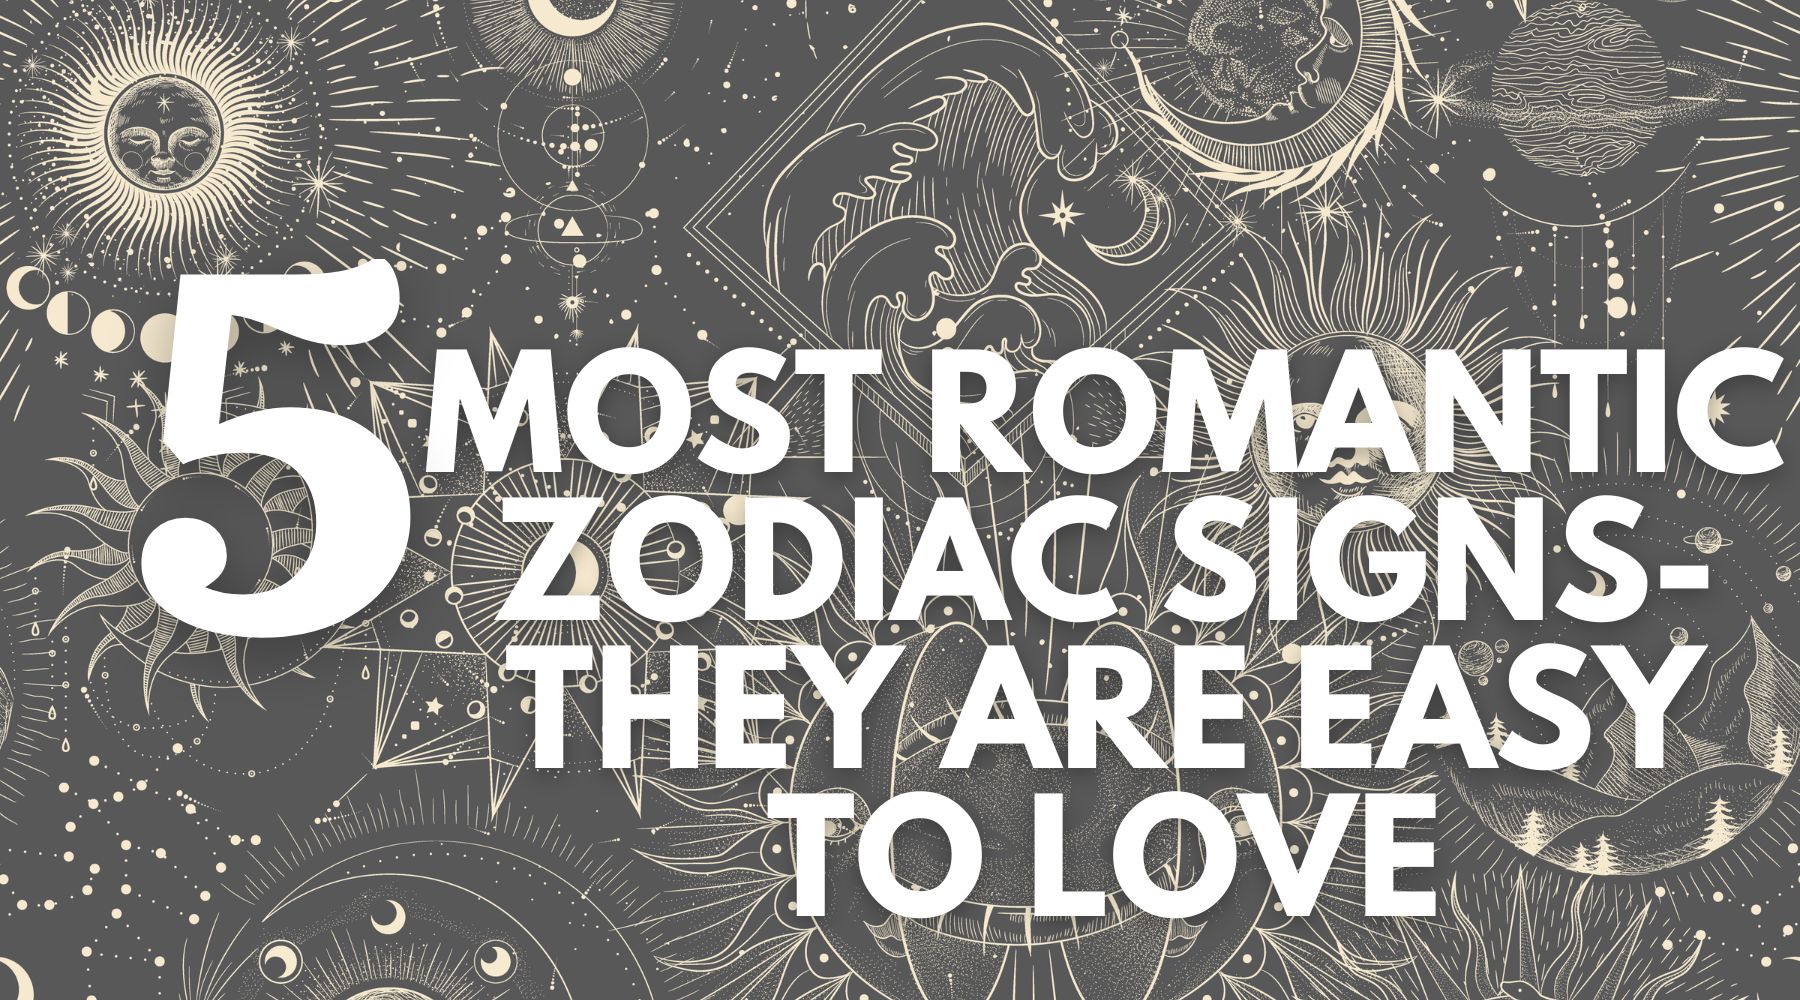 The 5 most romantic zodiac signs-They will find love fast in 2023